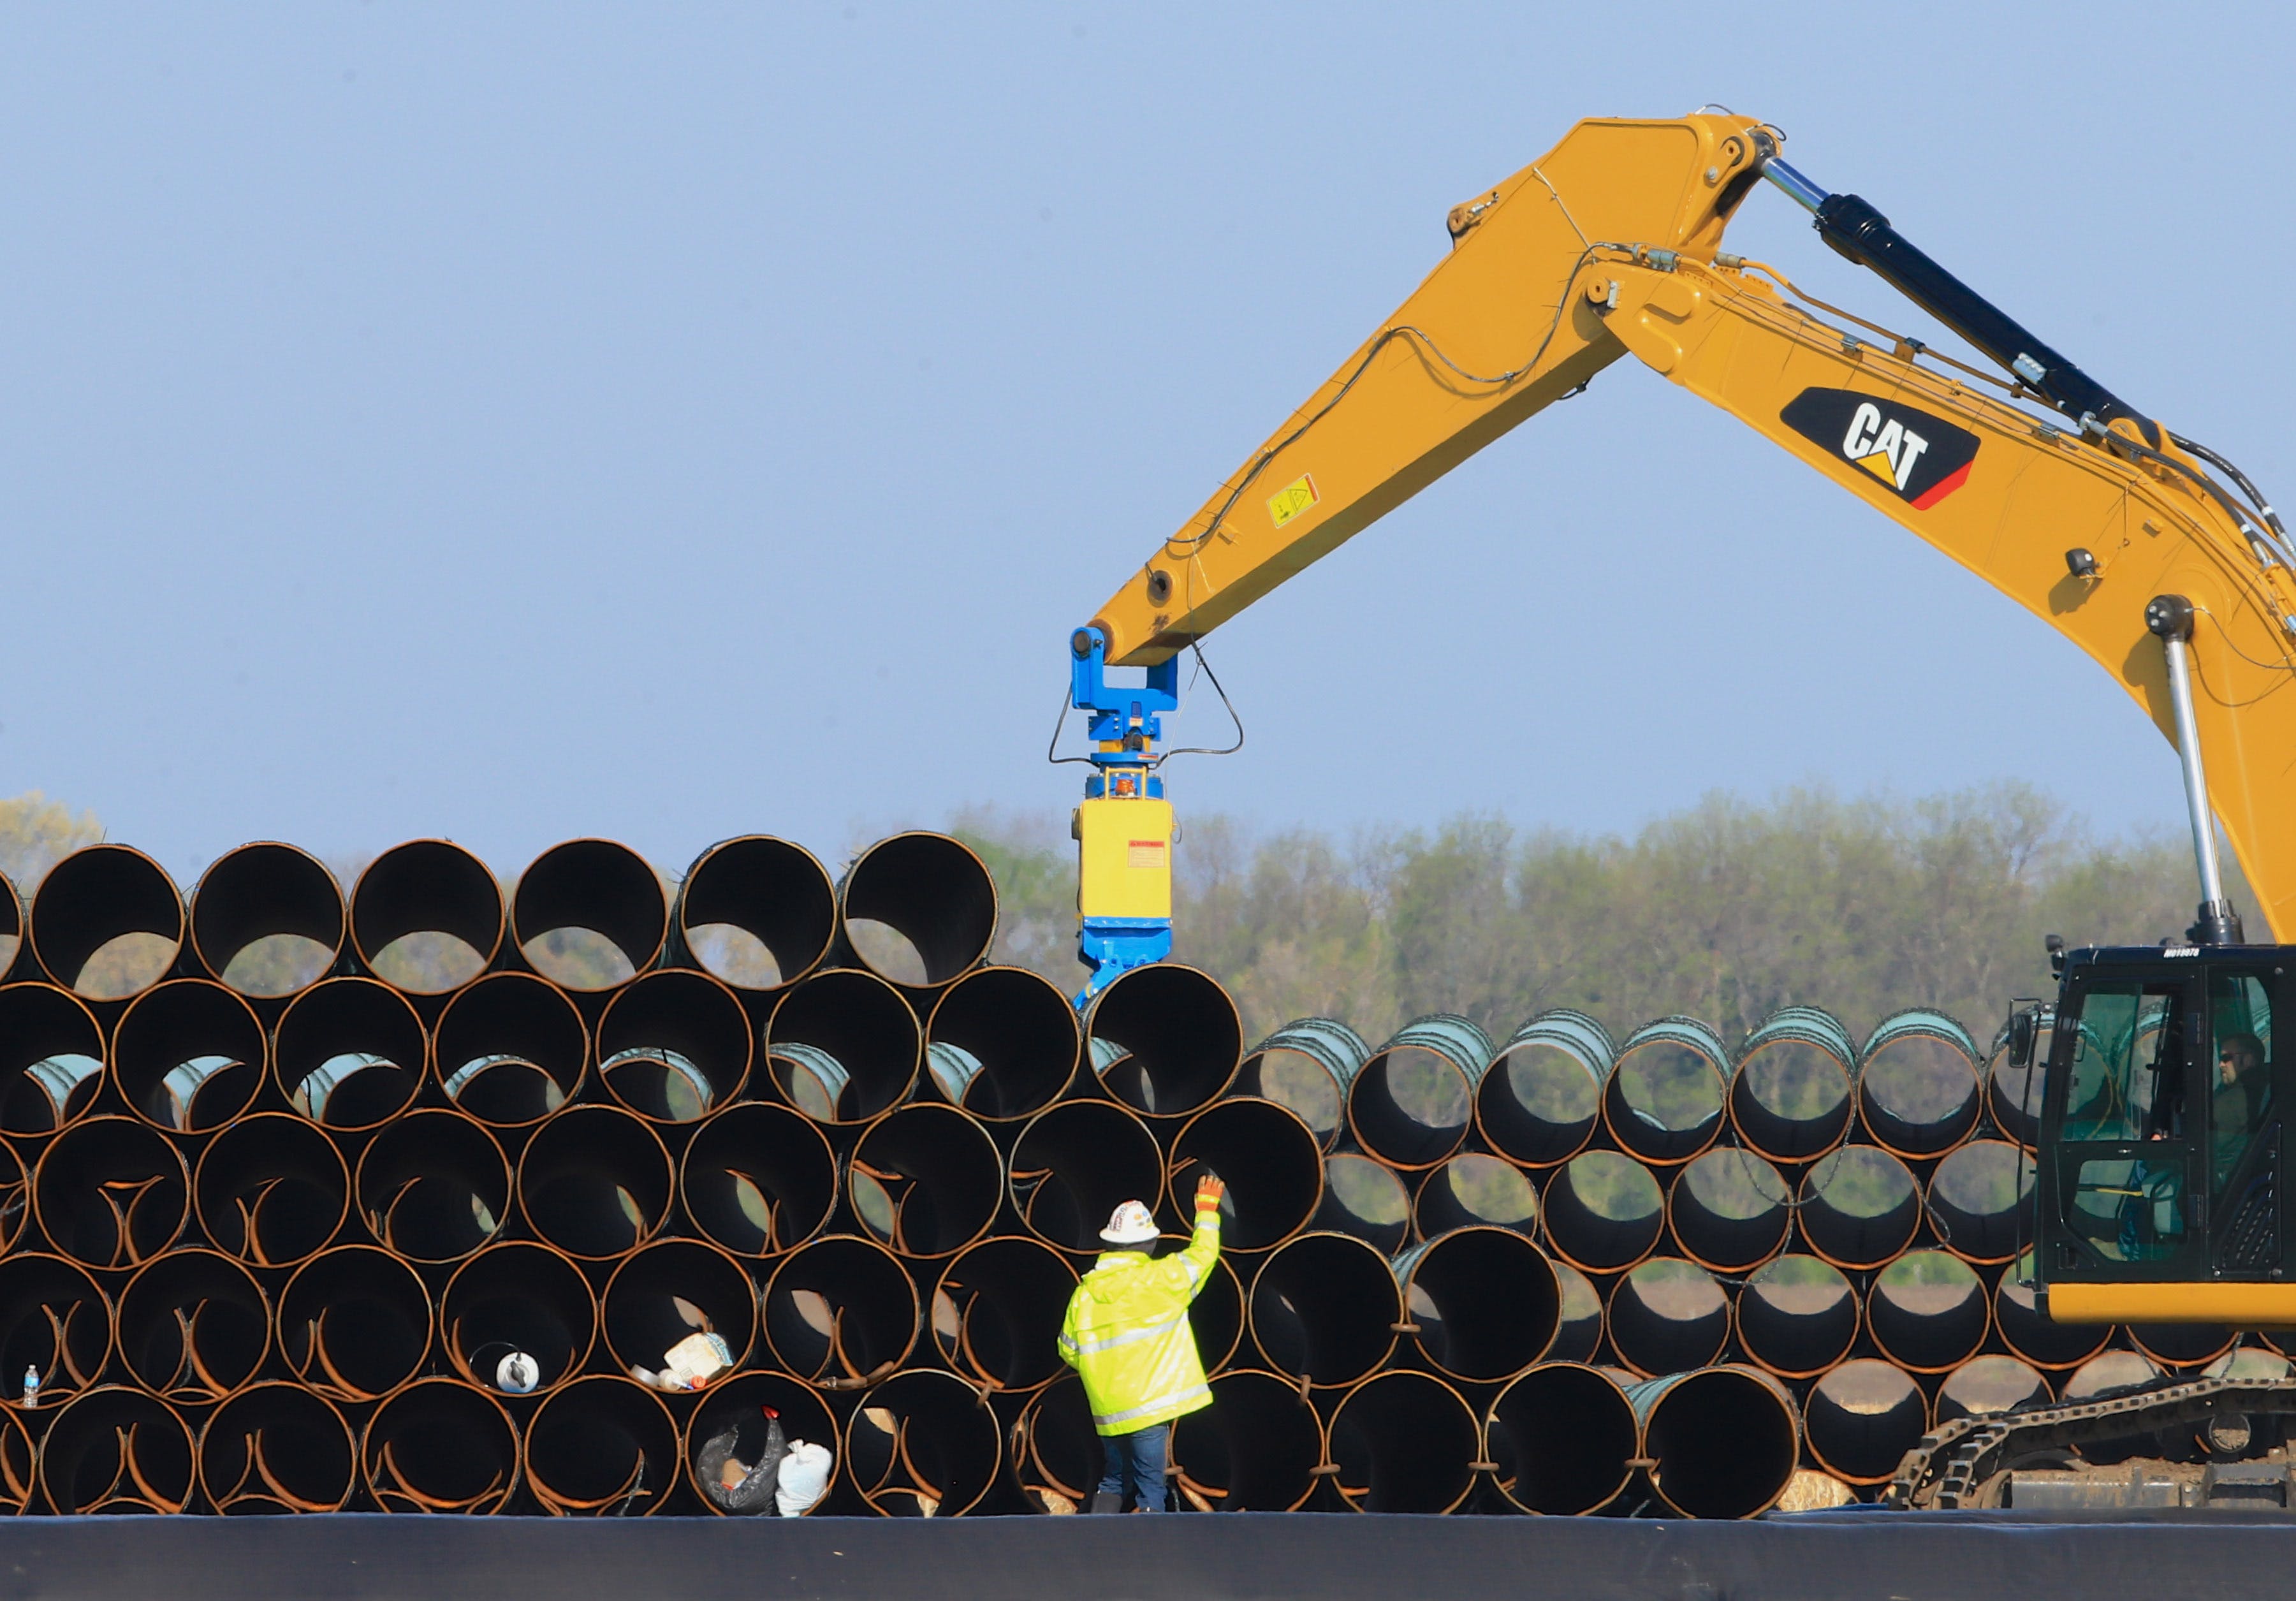 FILE - In this May 9, 2015 file photo, pipes for the proposed Dakota Access oil pipeline that will stretch from the Bakken oil fields in North Dakota to Illinois are stacked at a staging area in Worthing, S.D. Construction on the pipeline is now underway in North Dakota, South Dakota and Illinois, three of the four states that will carry the oil from western North Dakota. The pipeline also will cross Iowa, but regulators there have declined to act quickly on a request to allow Texas-based Energy Transfer Partners to begin construction in that state. (AP Photo/Nati Harnik, File)